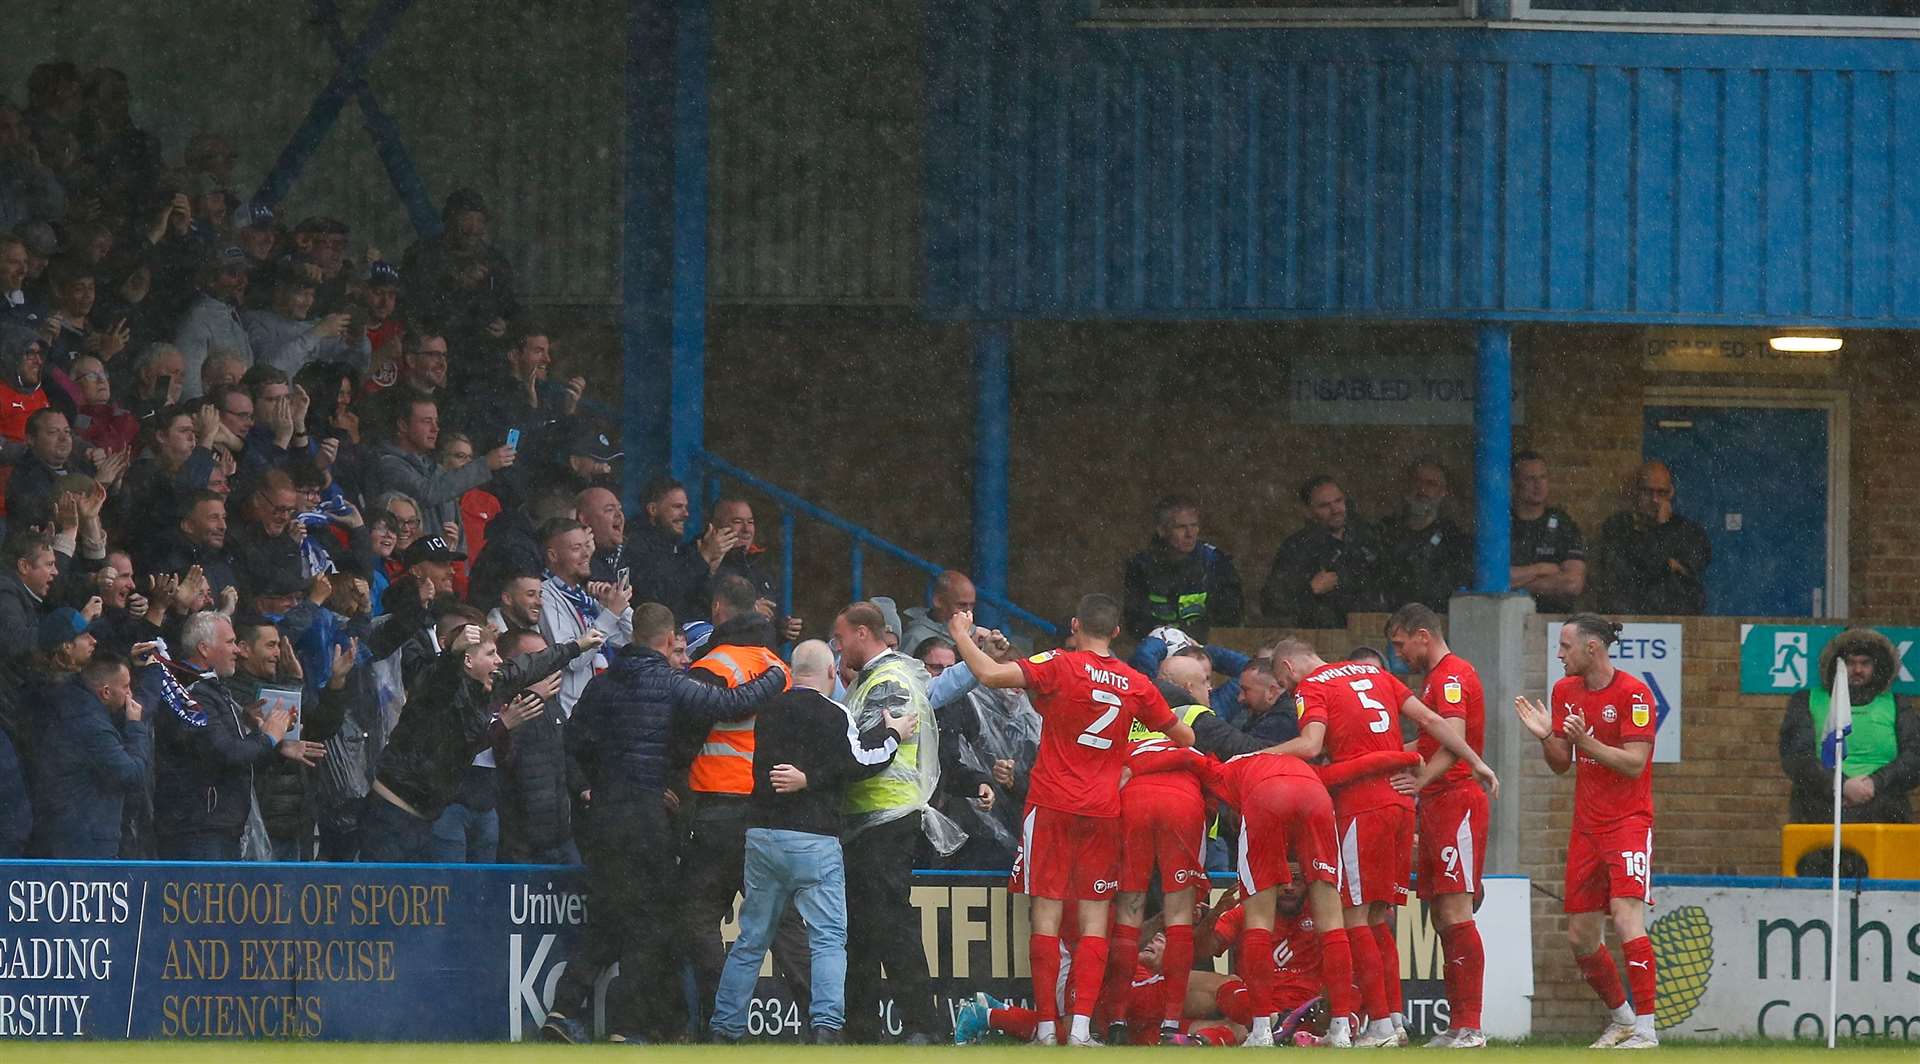 Wigan celebrate their first goal with their fans at Priestfield. Picture: Andy Jones (51835456)